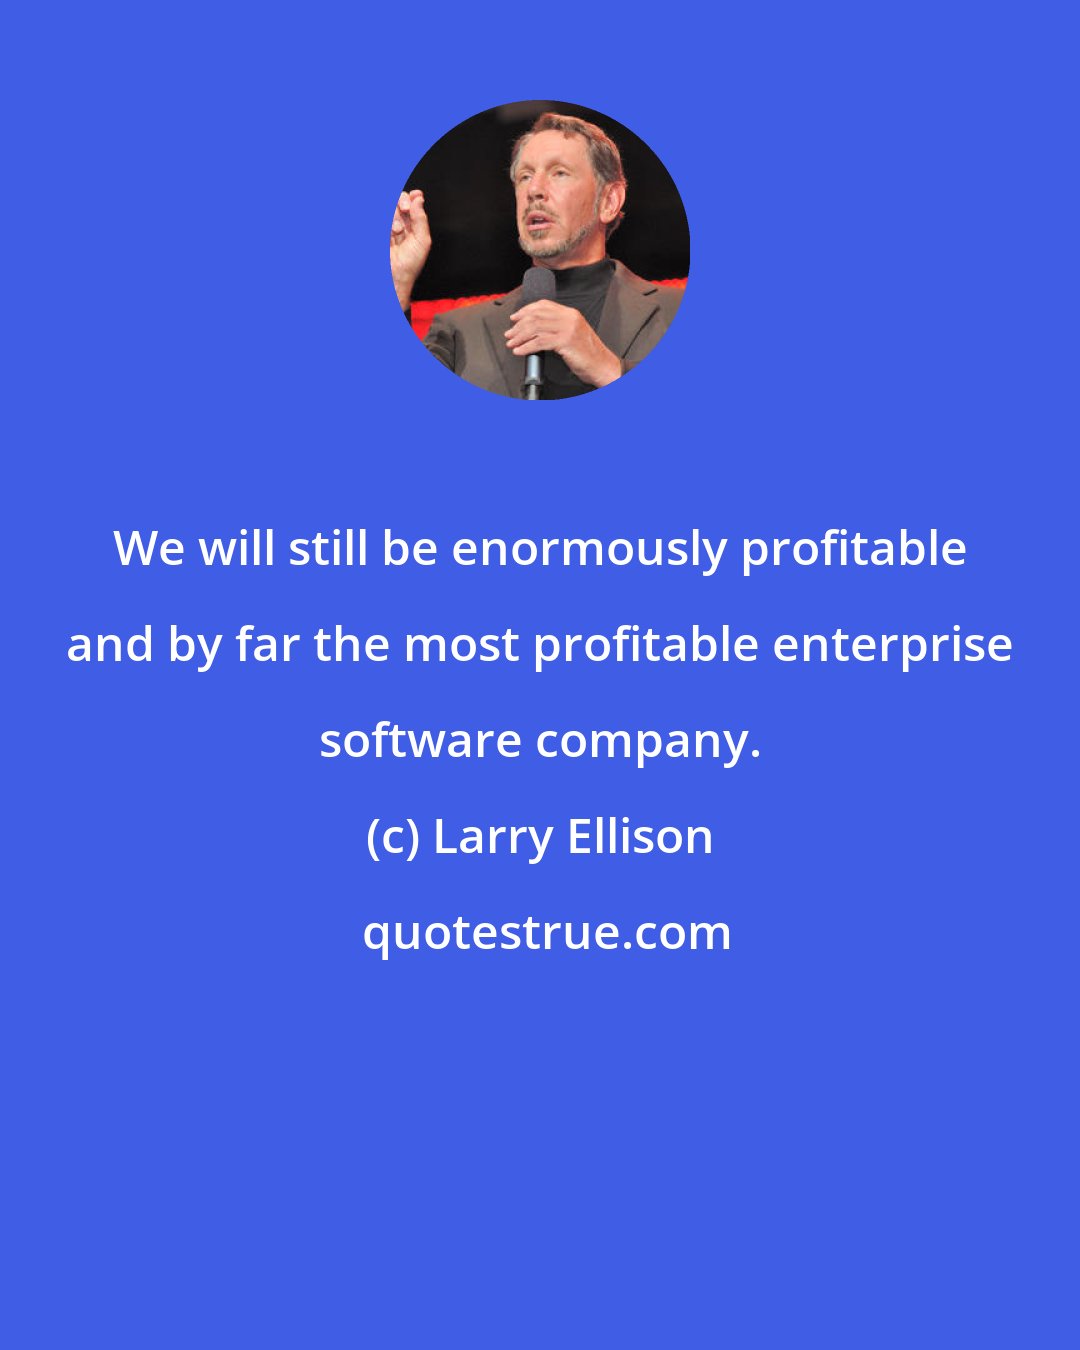 Larry Ellison: We will still be enormously profitable and by far the most profitable enterprise software company.